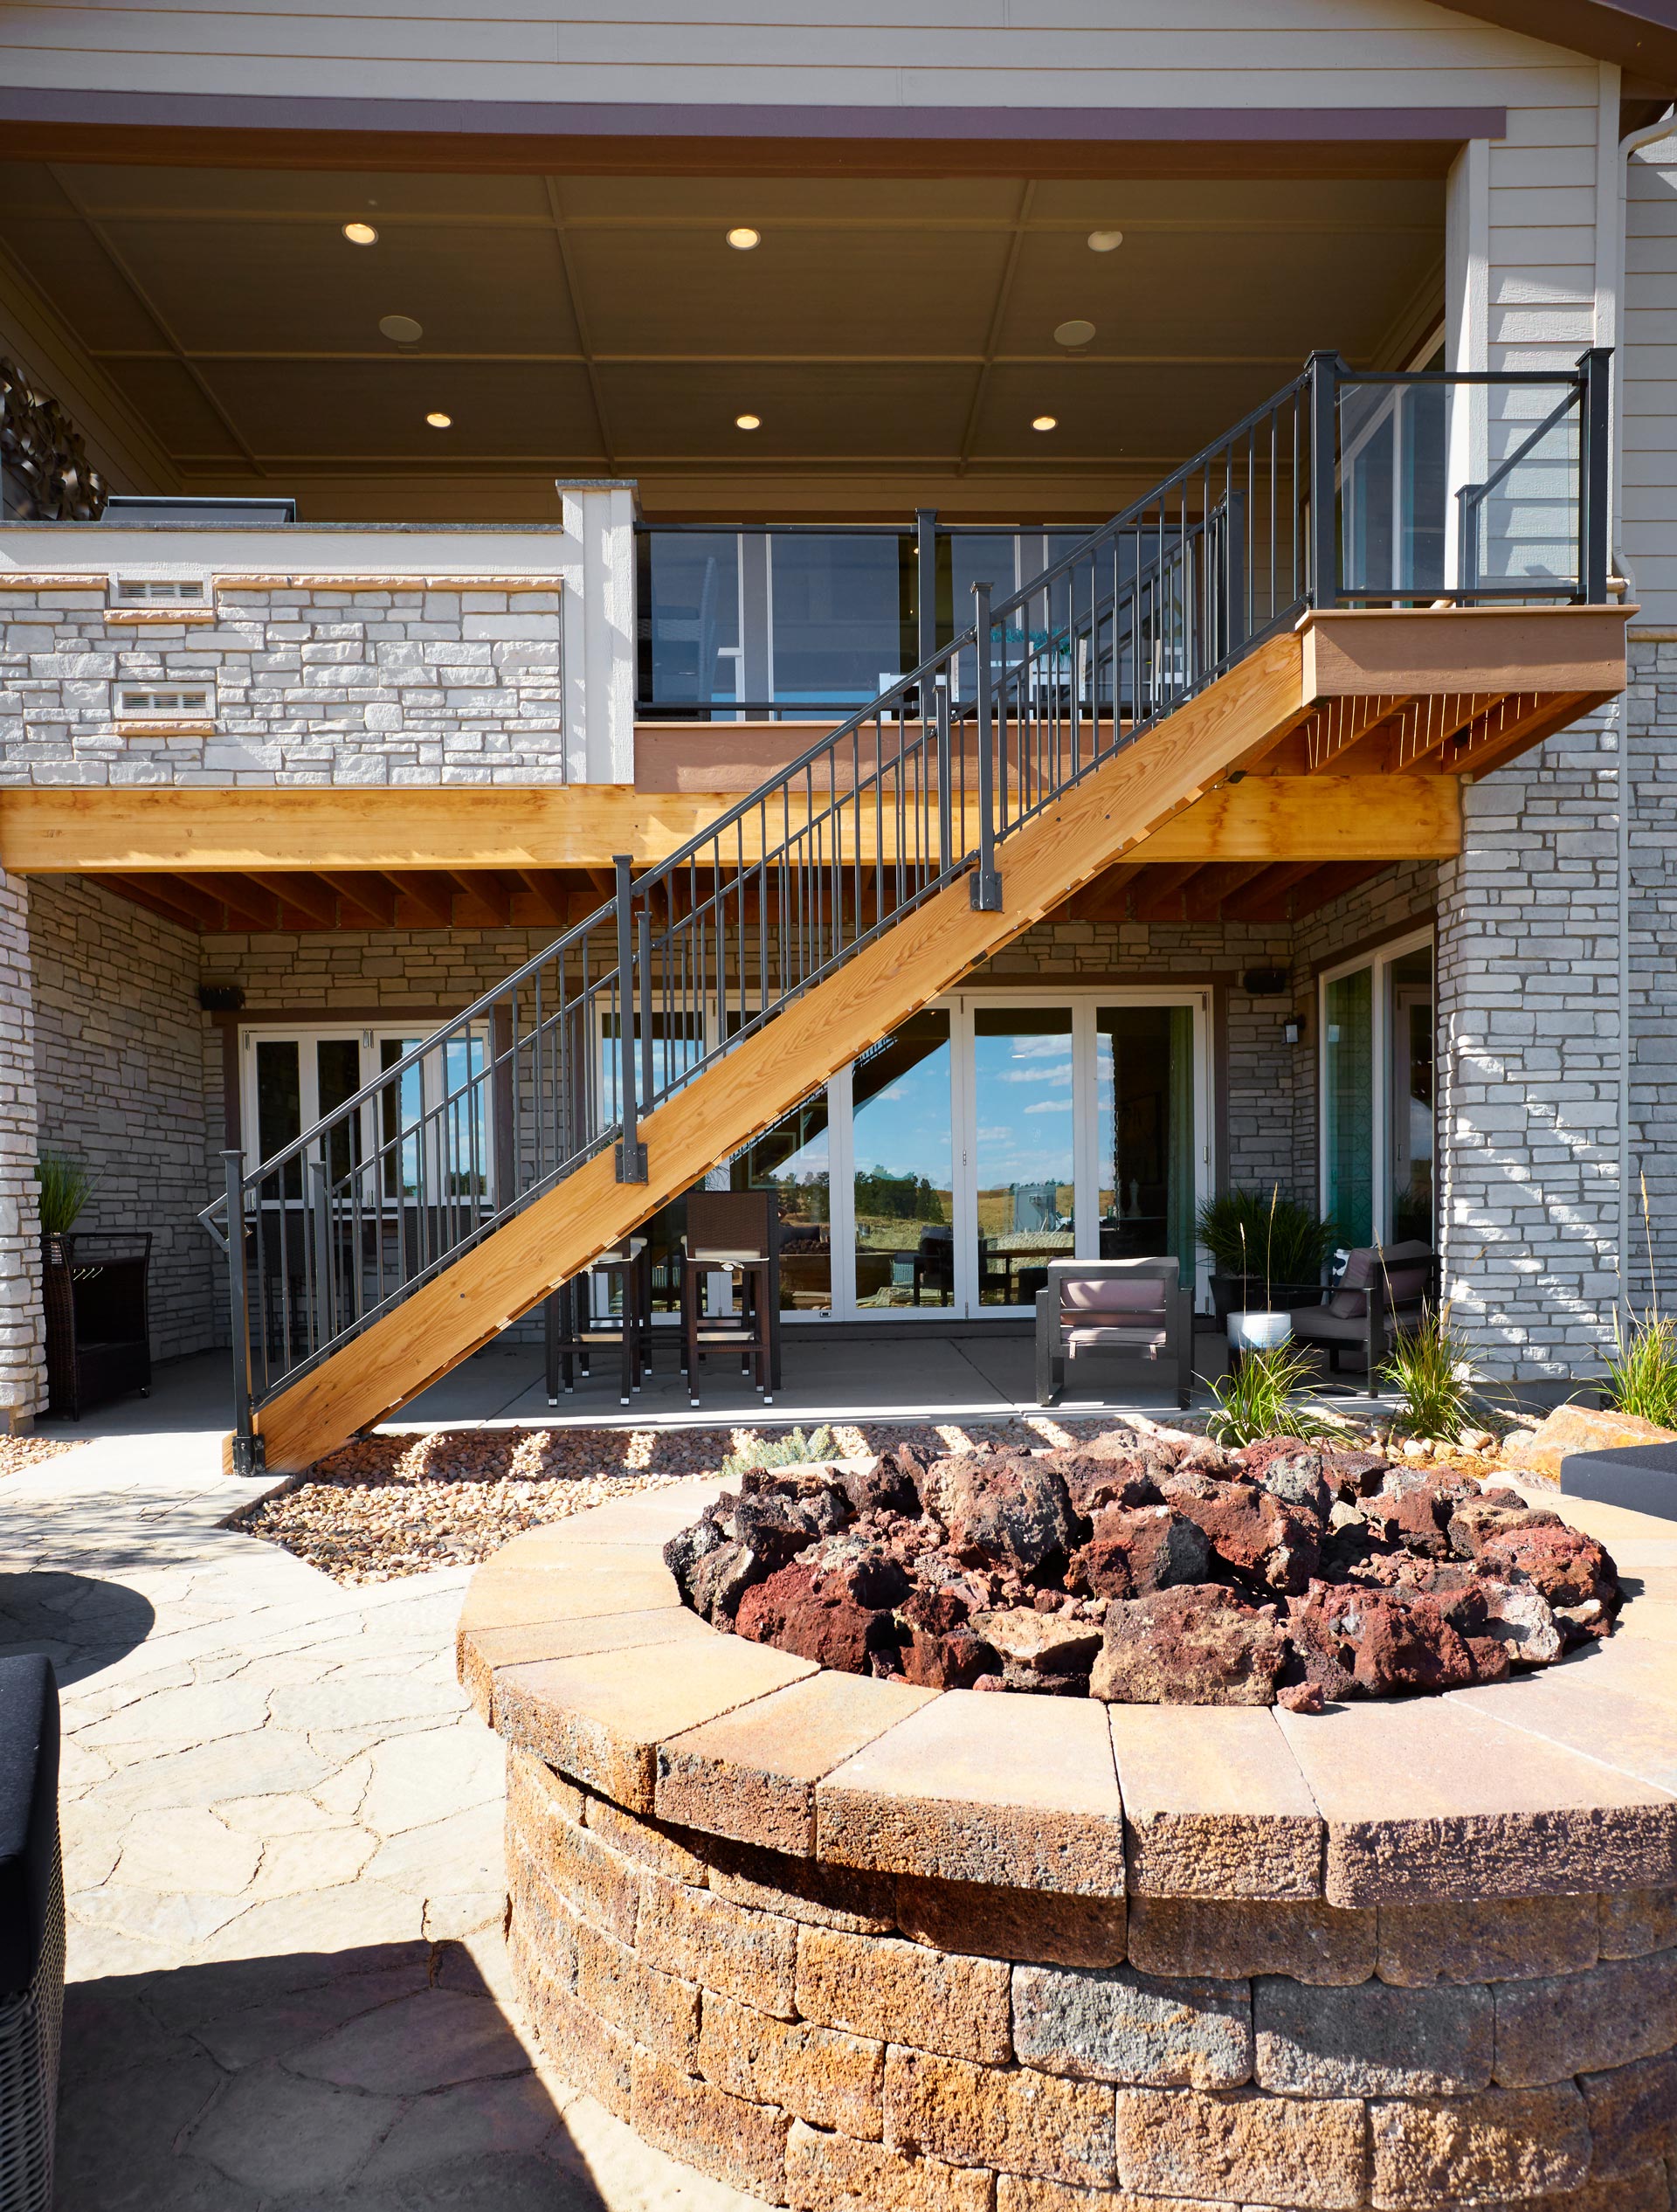 Large stone fireplace with deck stairs from upper deck in background.